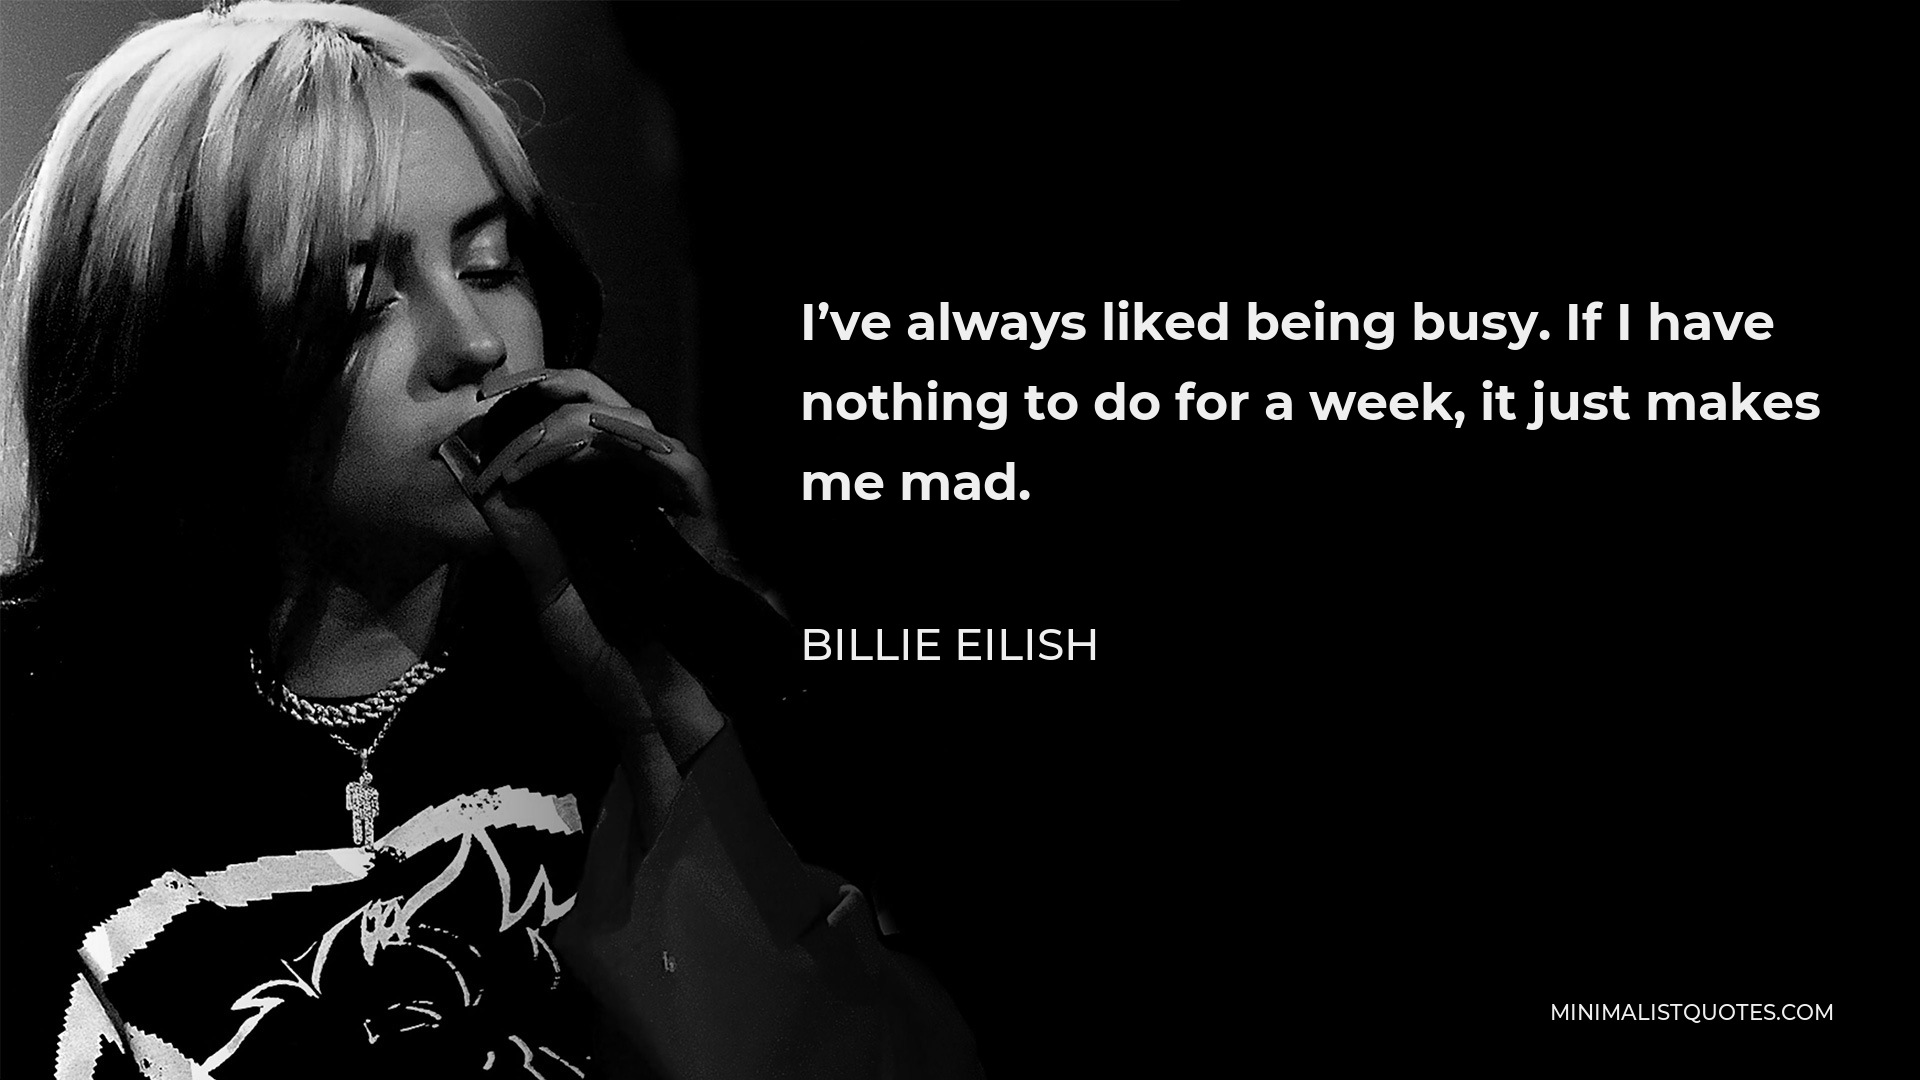 Billie Eilish Quote - I’ve always liked being busy. If I have nothing to do for a week, it just makes me mad.